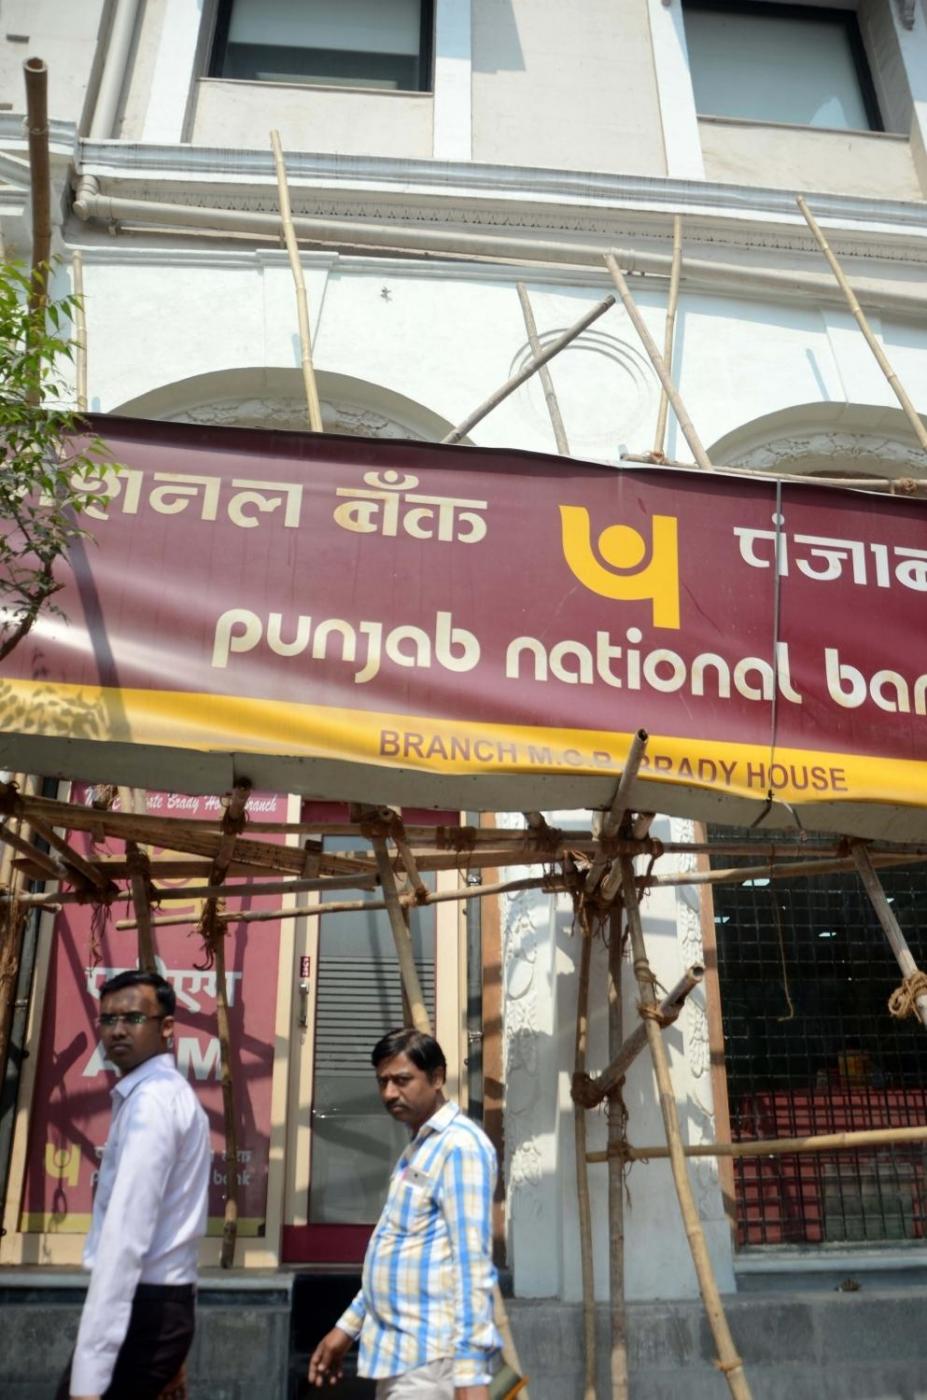 Mumbai: The Punjab National Bank's (PNB) Brady House branch where a massive $1.8 billion fraud was unearthed, in Mumbai on Feb 15, 2018. A day after a massive $1.8 billion fraud was unearthed in the flagship branch, the Enforcement Directorate launched a nationwide raid on billionaire diamond trader Nirav Modi the offices, showrooms and workshops.The multi-pronged action came a day after the Punjab National Bank admitted to unearthing a fraud of Rs 11,515 crore involving Modi's companies and certain other accounts with the bank's flagship branch (Brady House) in Mumbai and its second largest lending window in India.The fraud, which includes money-laundering among others, concerns the Firestar Diamonds group in which the CBI last week booked Modi, his wife Ami, brother Nishal and a maternal uncle Mehul Choksi.It is learnt that Modi - whose operations are spread across Europe, the US, Middle East and Far East besides India - has written to PNB and other banks that he would return their outstandings. (Photo: Sandeep Mahankal/IANS) by . 